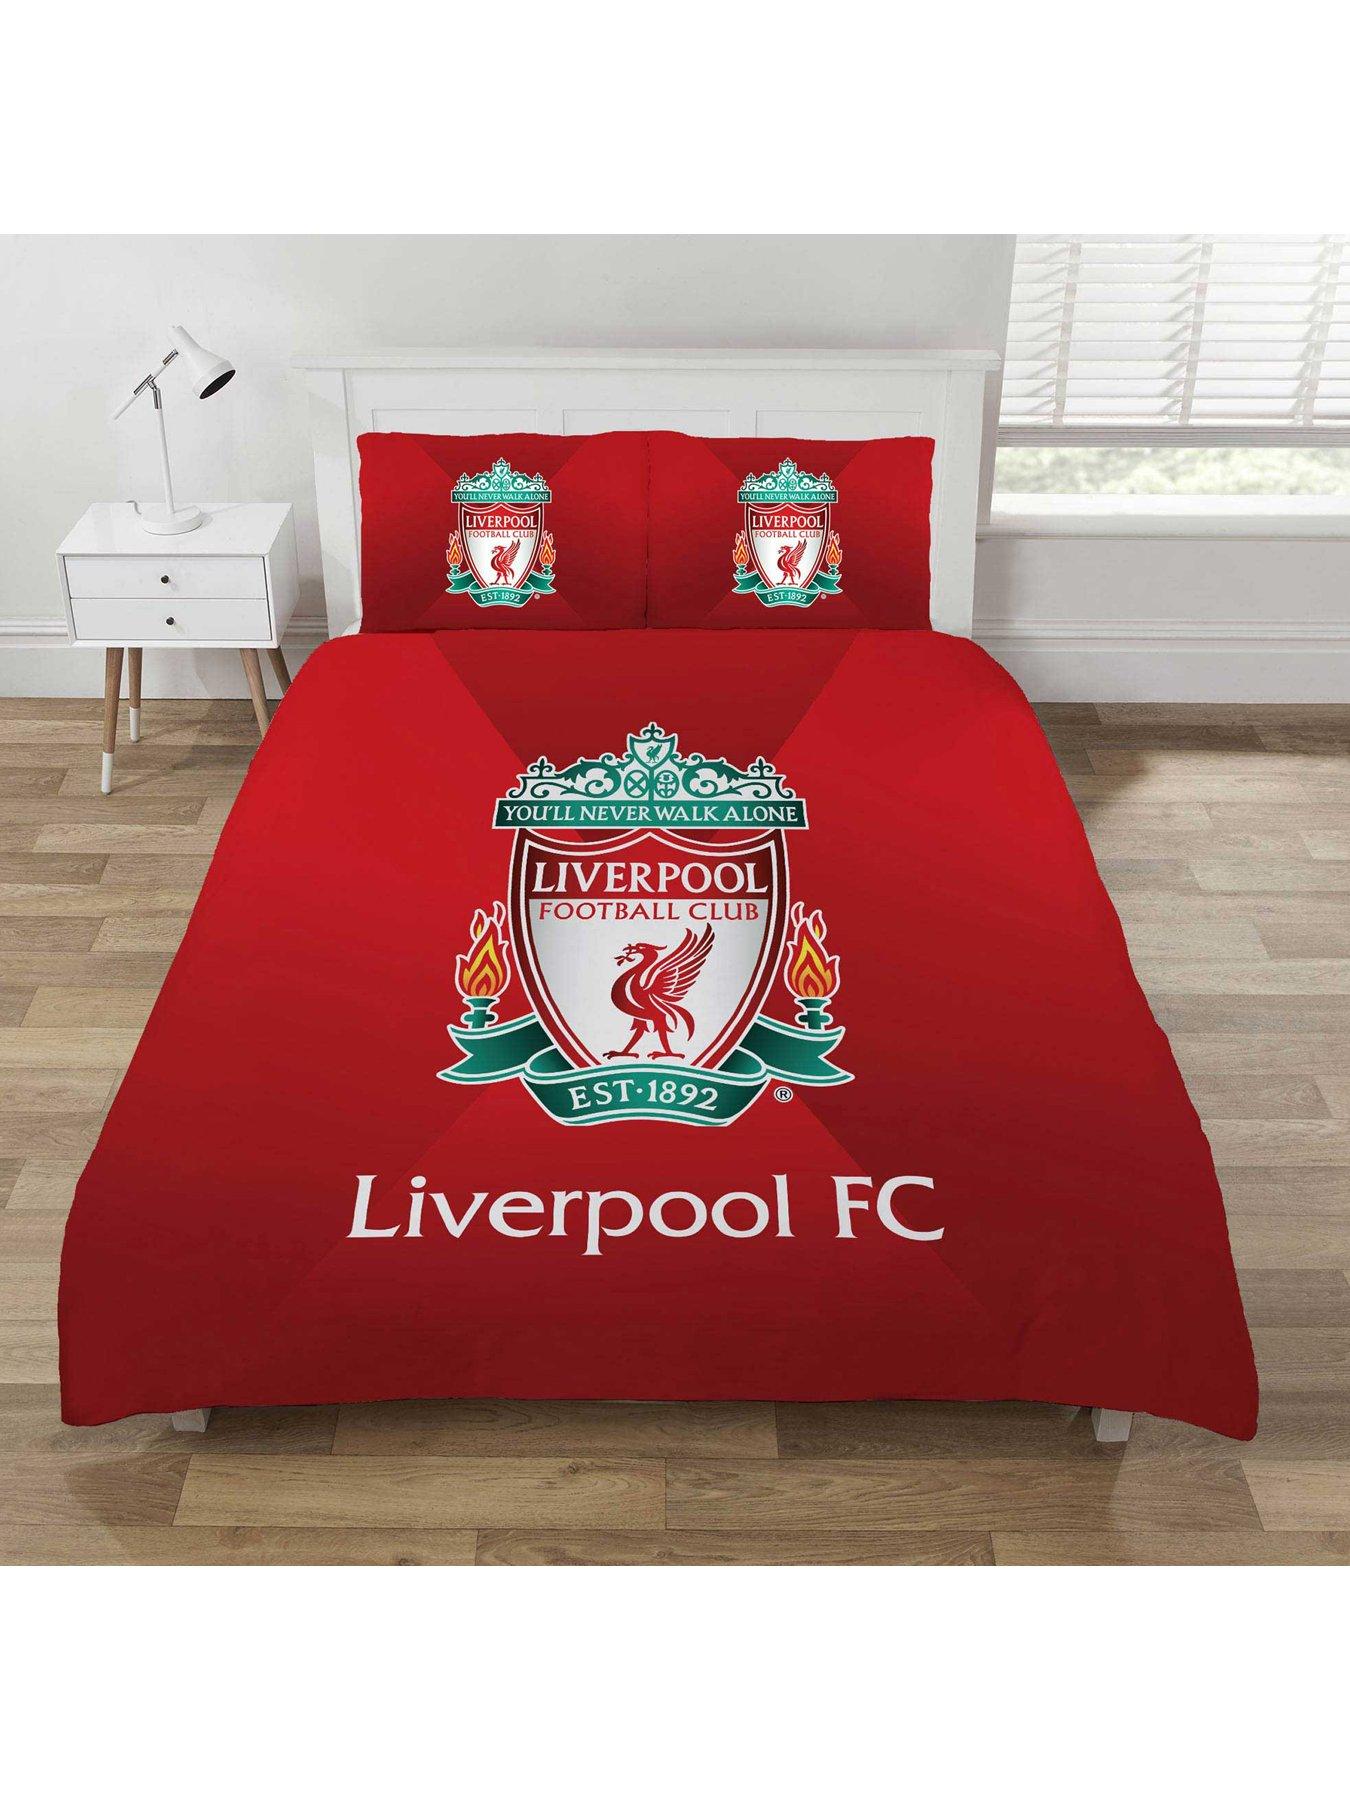 Fc Football Licensed Product Liverpool F.c Bedroom Lamp Official Merchandise 